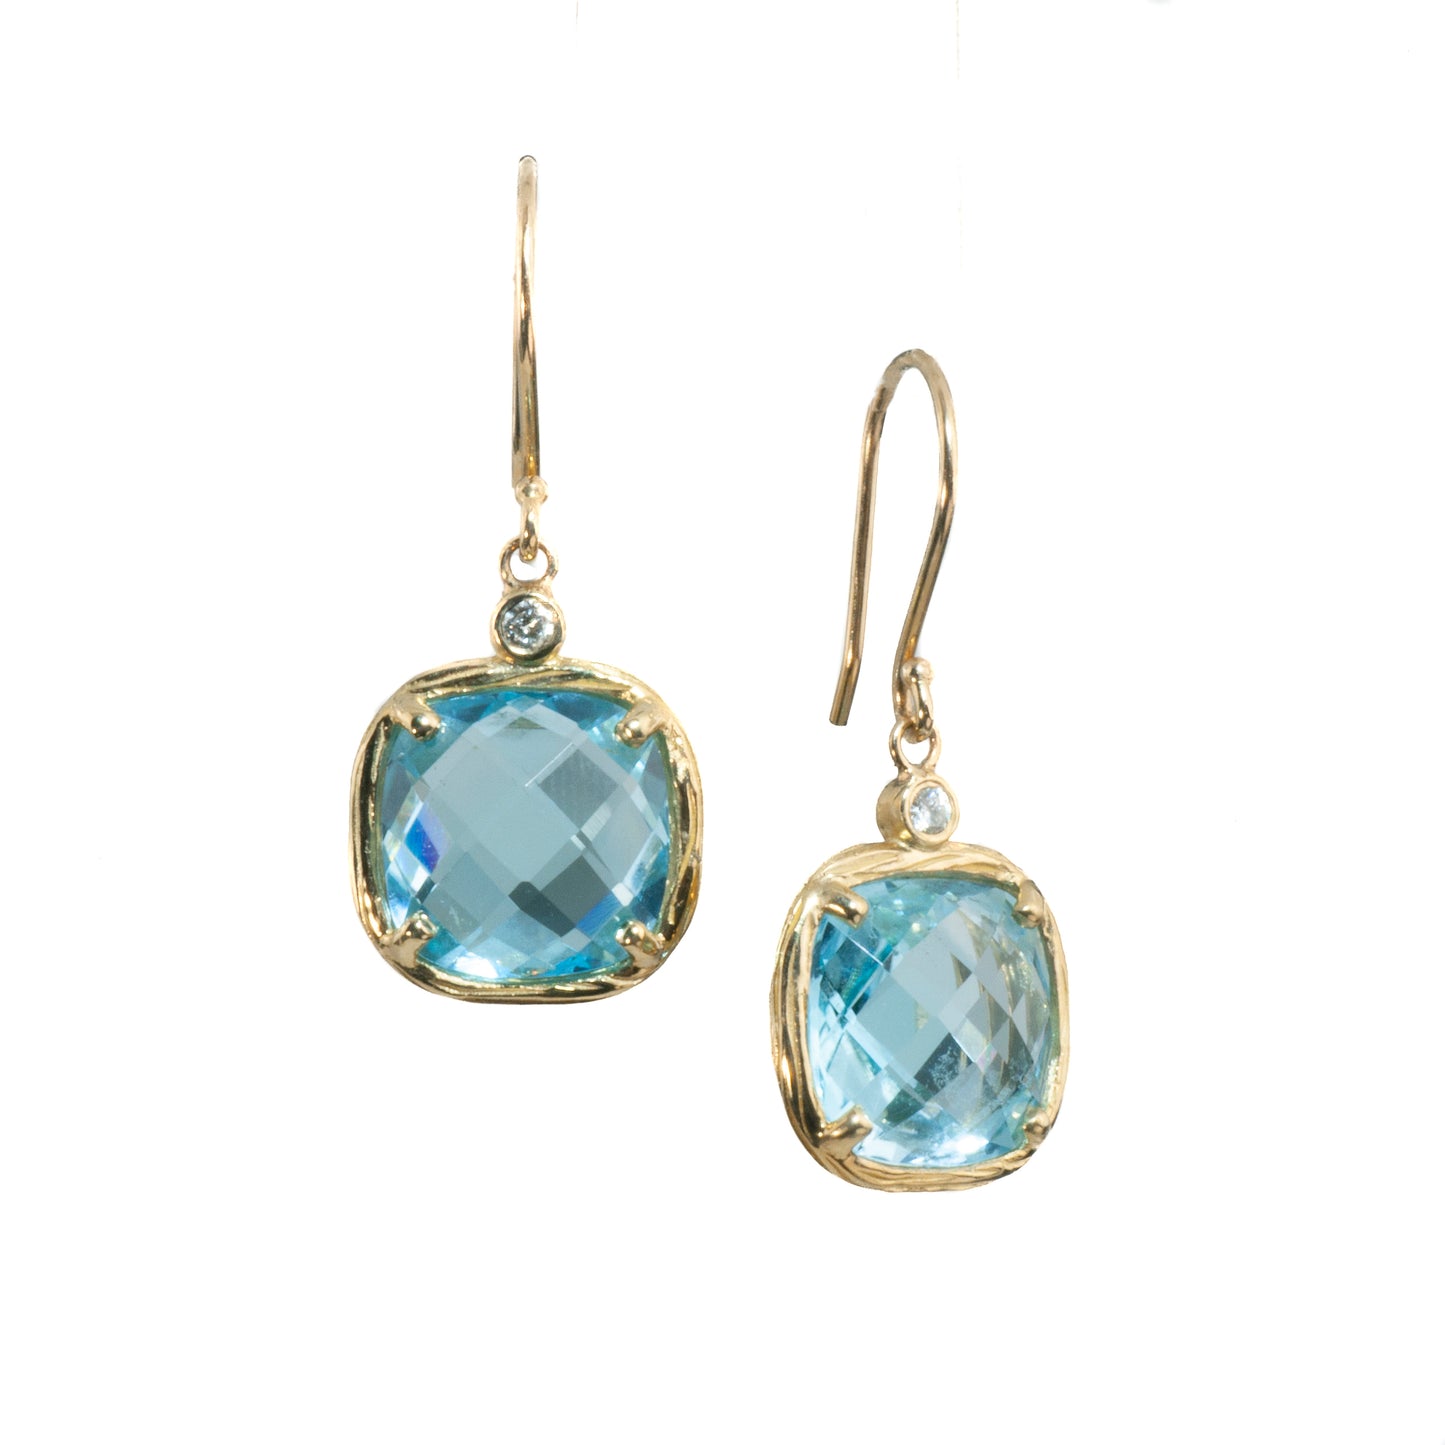 Riverbend Collection Yellow Gold Blue Topaz Earrings